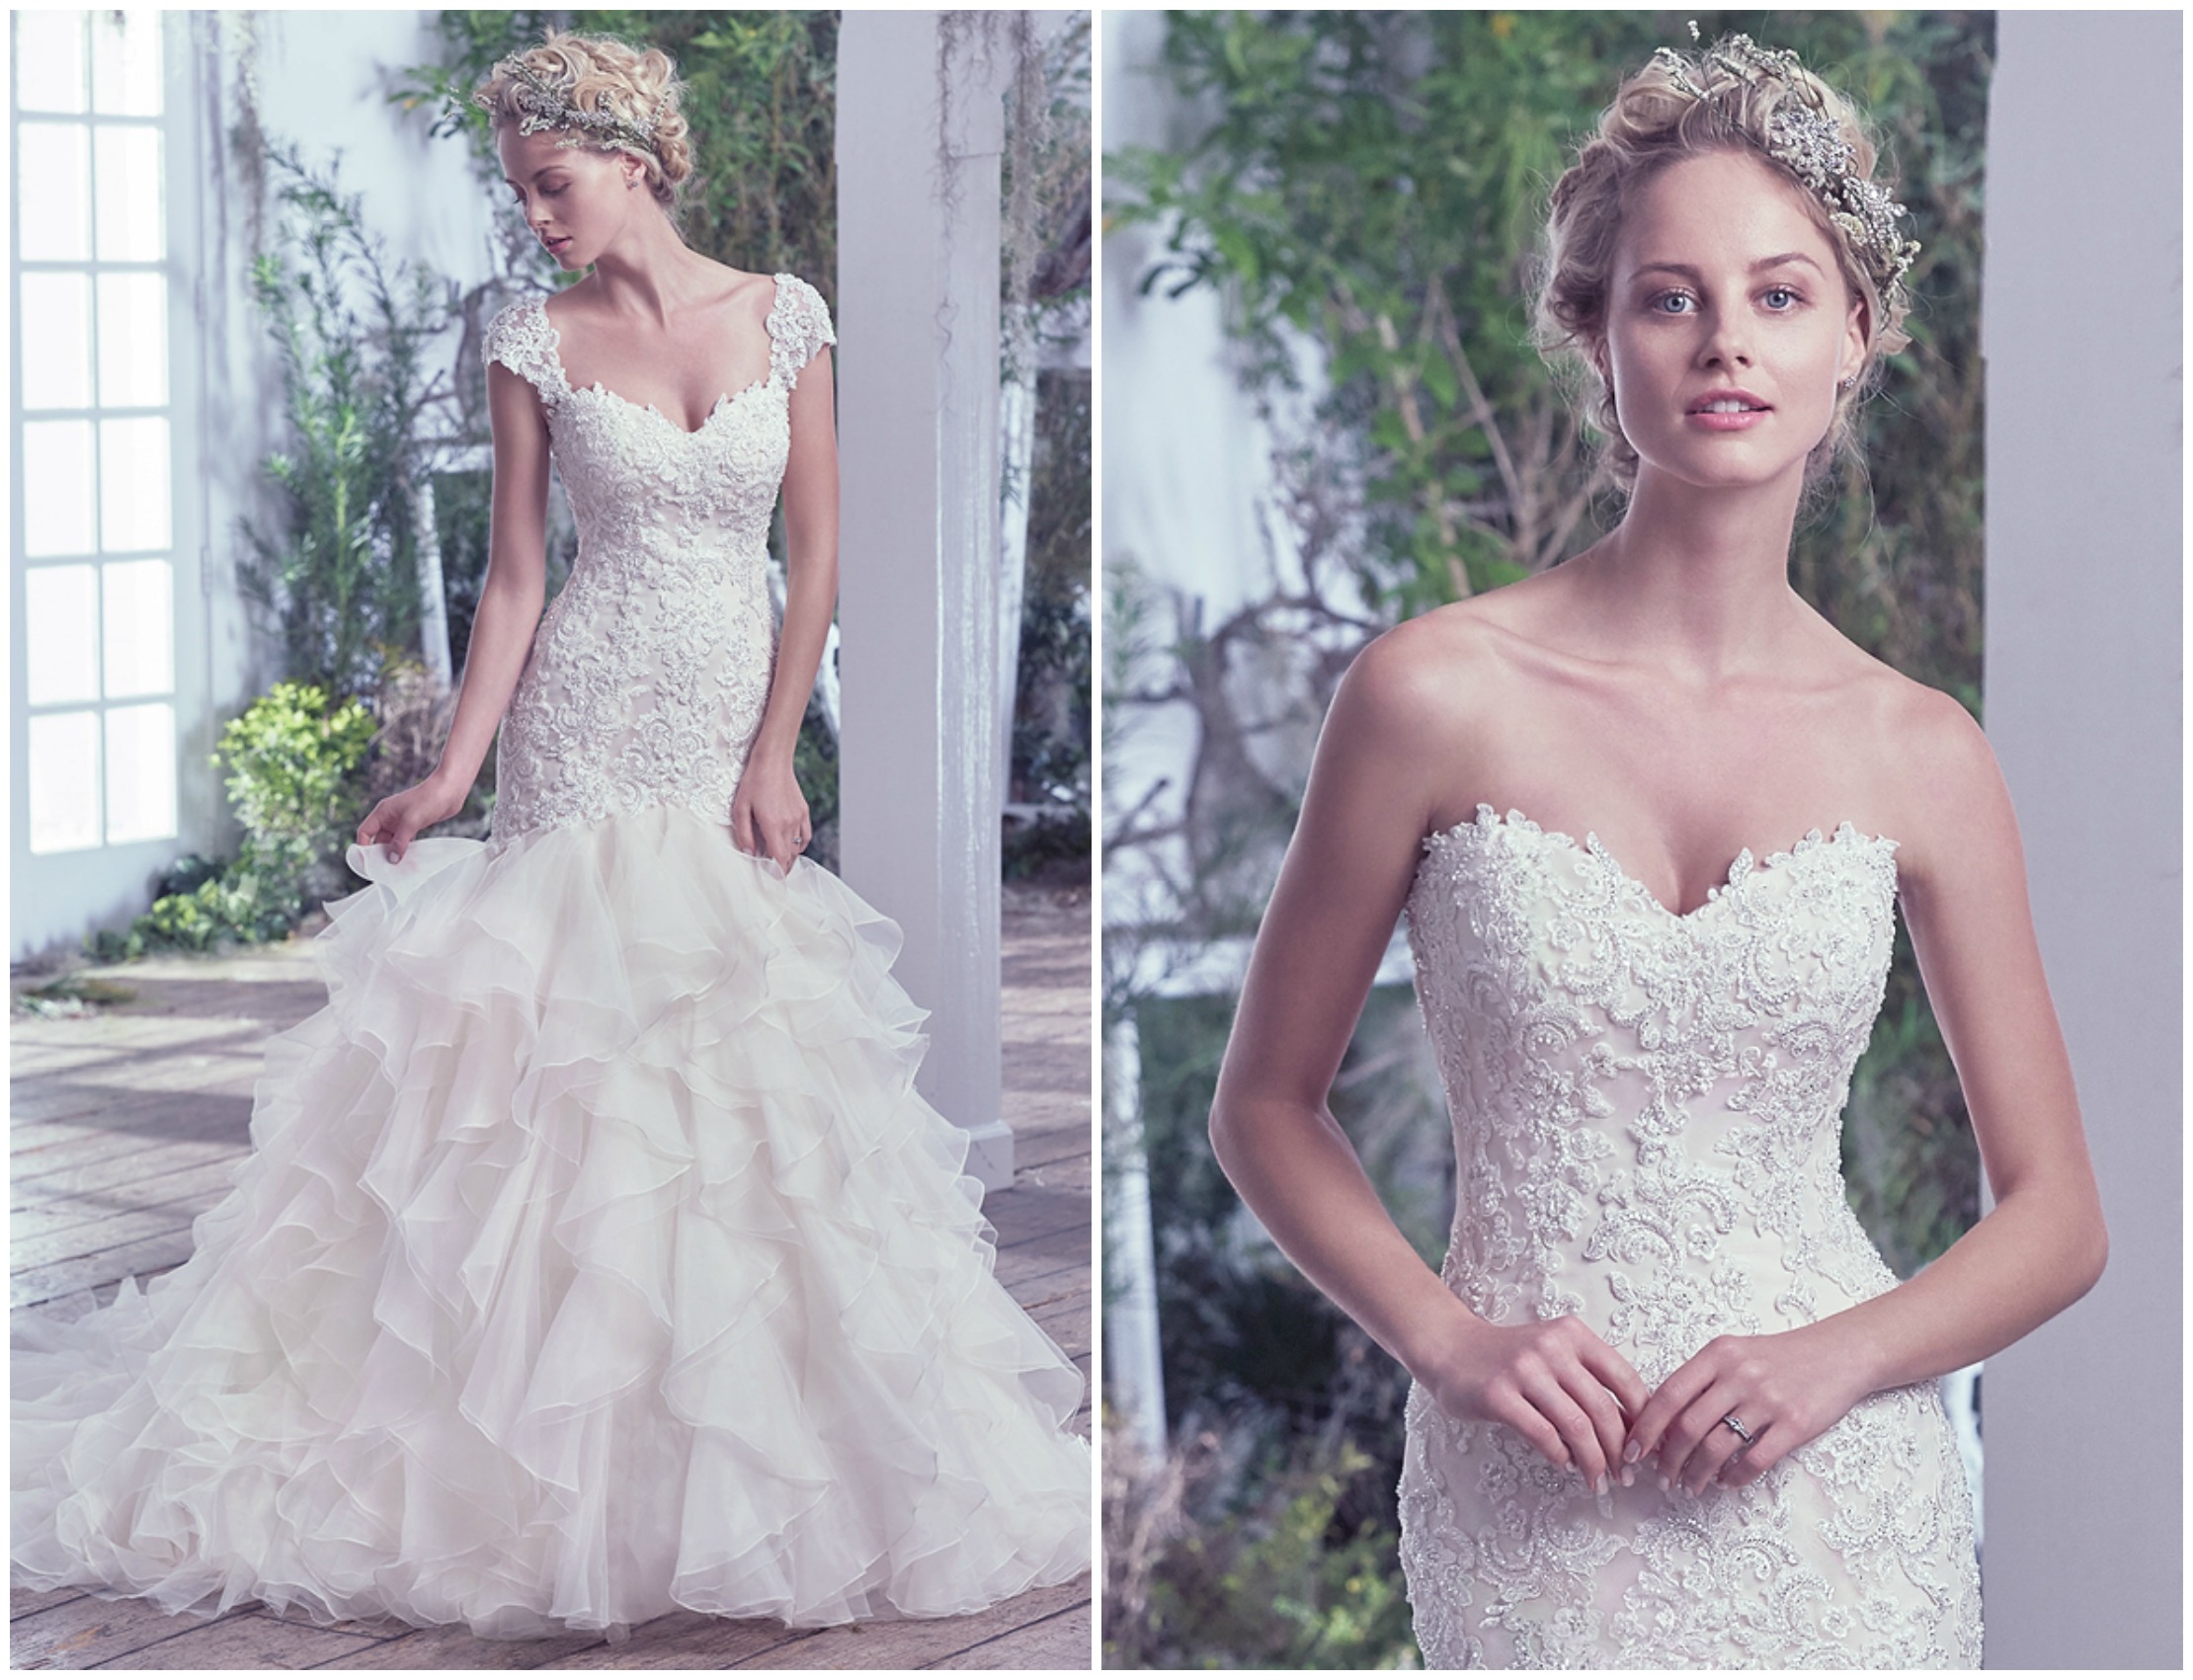 Refined bridal romance is epitomized in this fit and flare wedding dress, featuring an intricate lace and beaded drop waist bodice, flaring into a layered tulle and Chic organza skirt. Finished with covered buttons over zipper and inner corset closure. Detachable lace cap-sleeves sold separately.

<a href="https://www.maggiesottero.com/maggie-sottero/tawny/9732" target="_blank">Maggie Sottero</a>